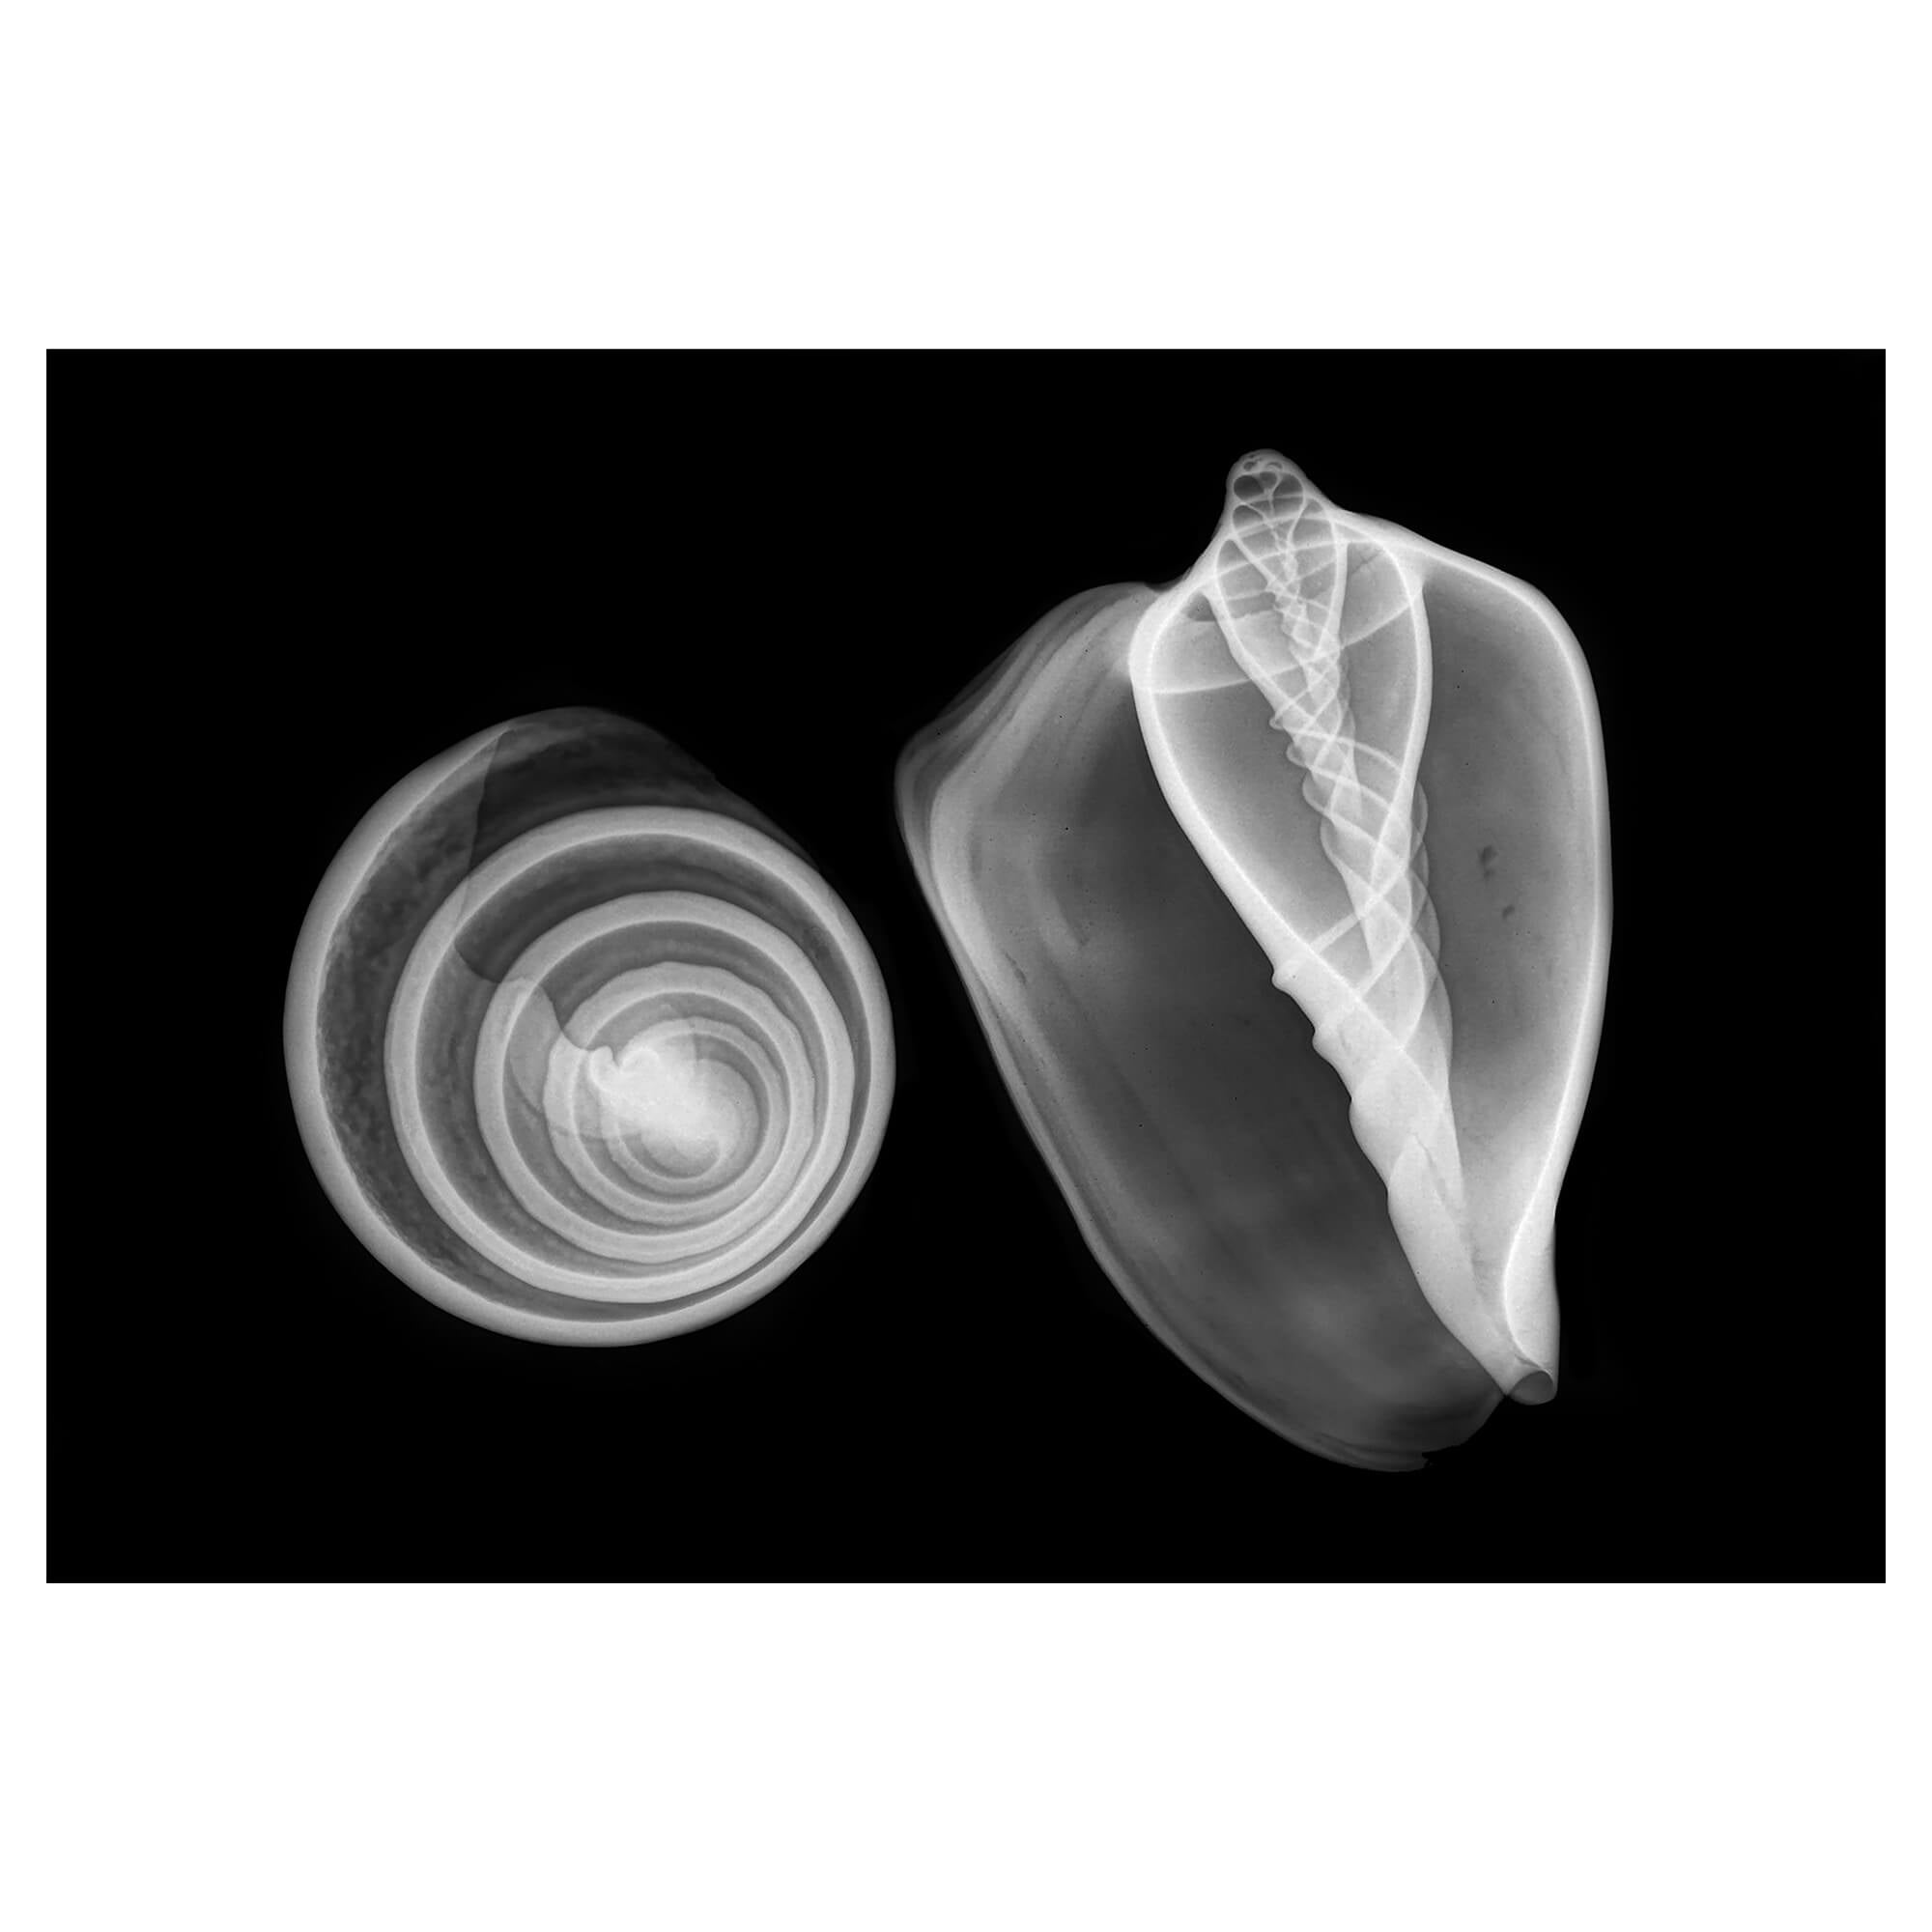 Trocha-Volute Shells through the use of X-ray technology by Hawaii artist Michelle Smith